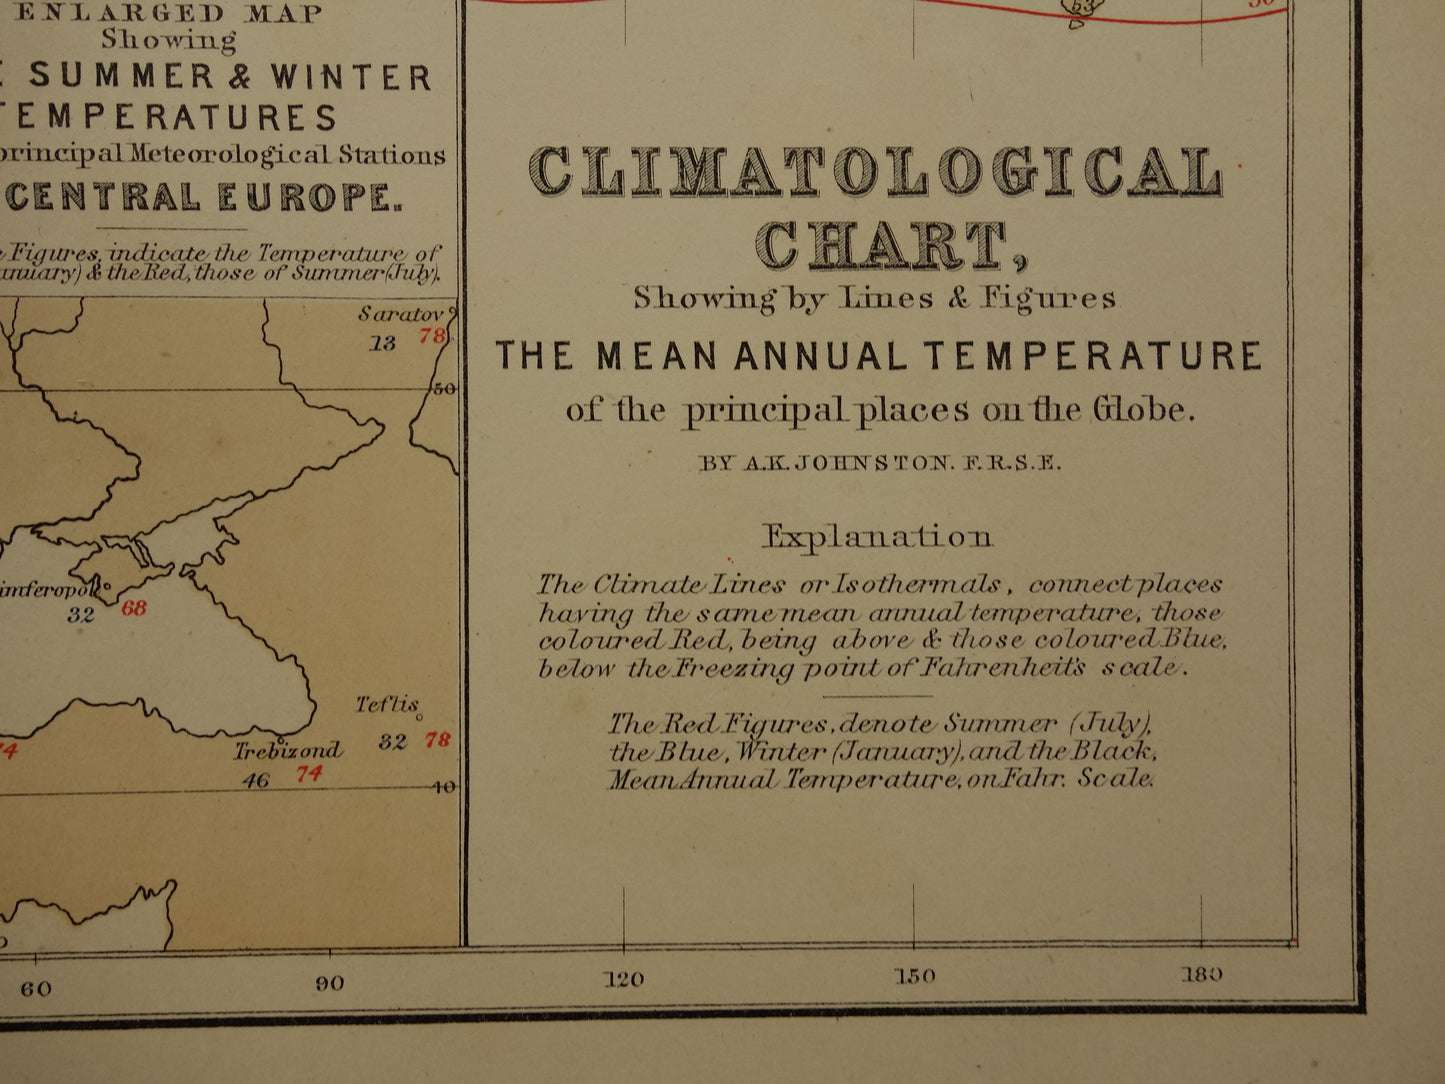 16 Climatological chart showing by lines and figures the mean annual temperature